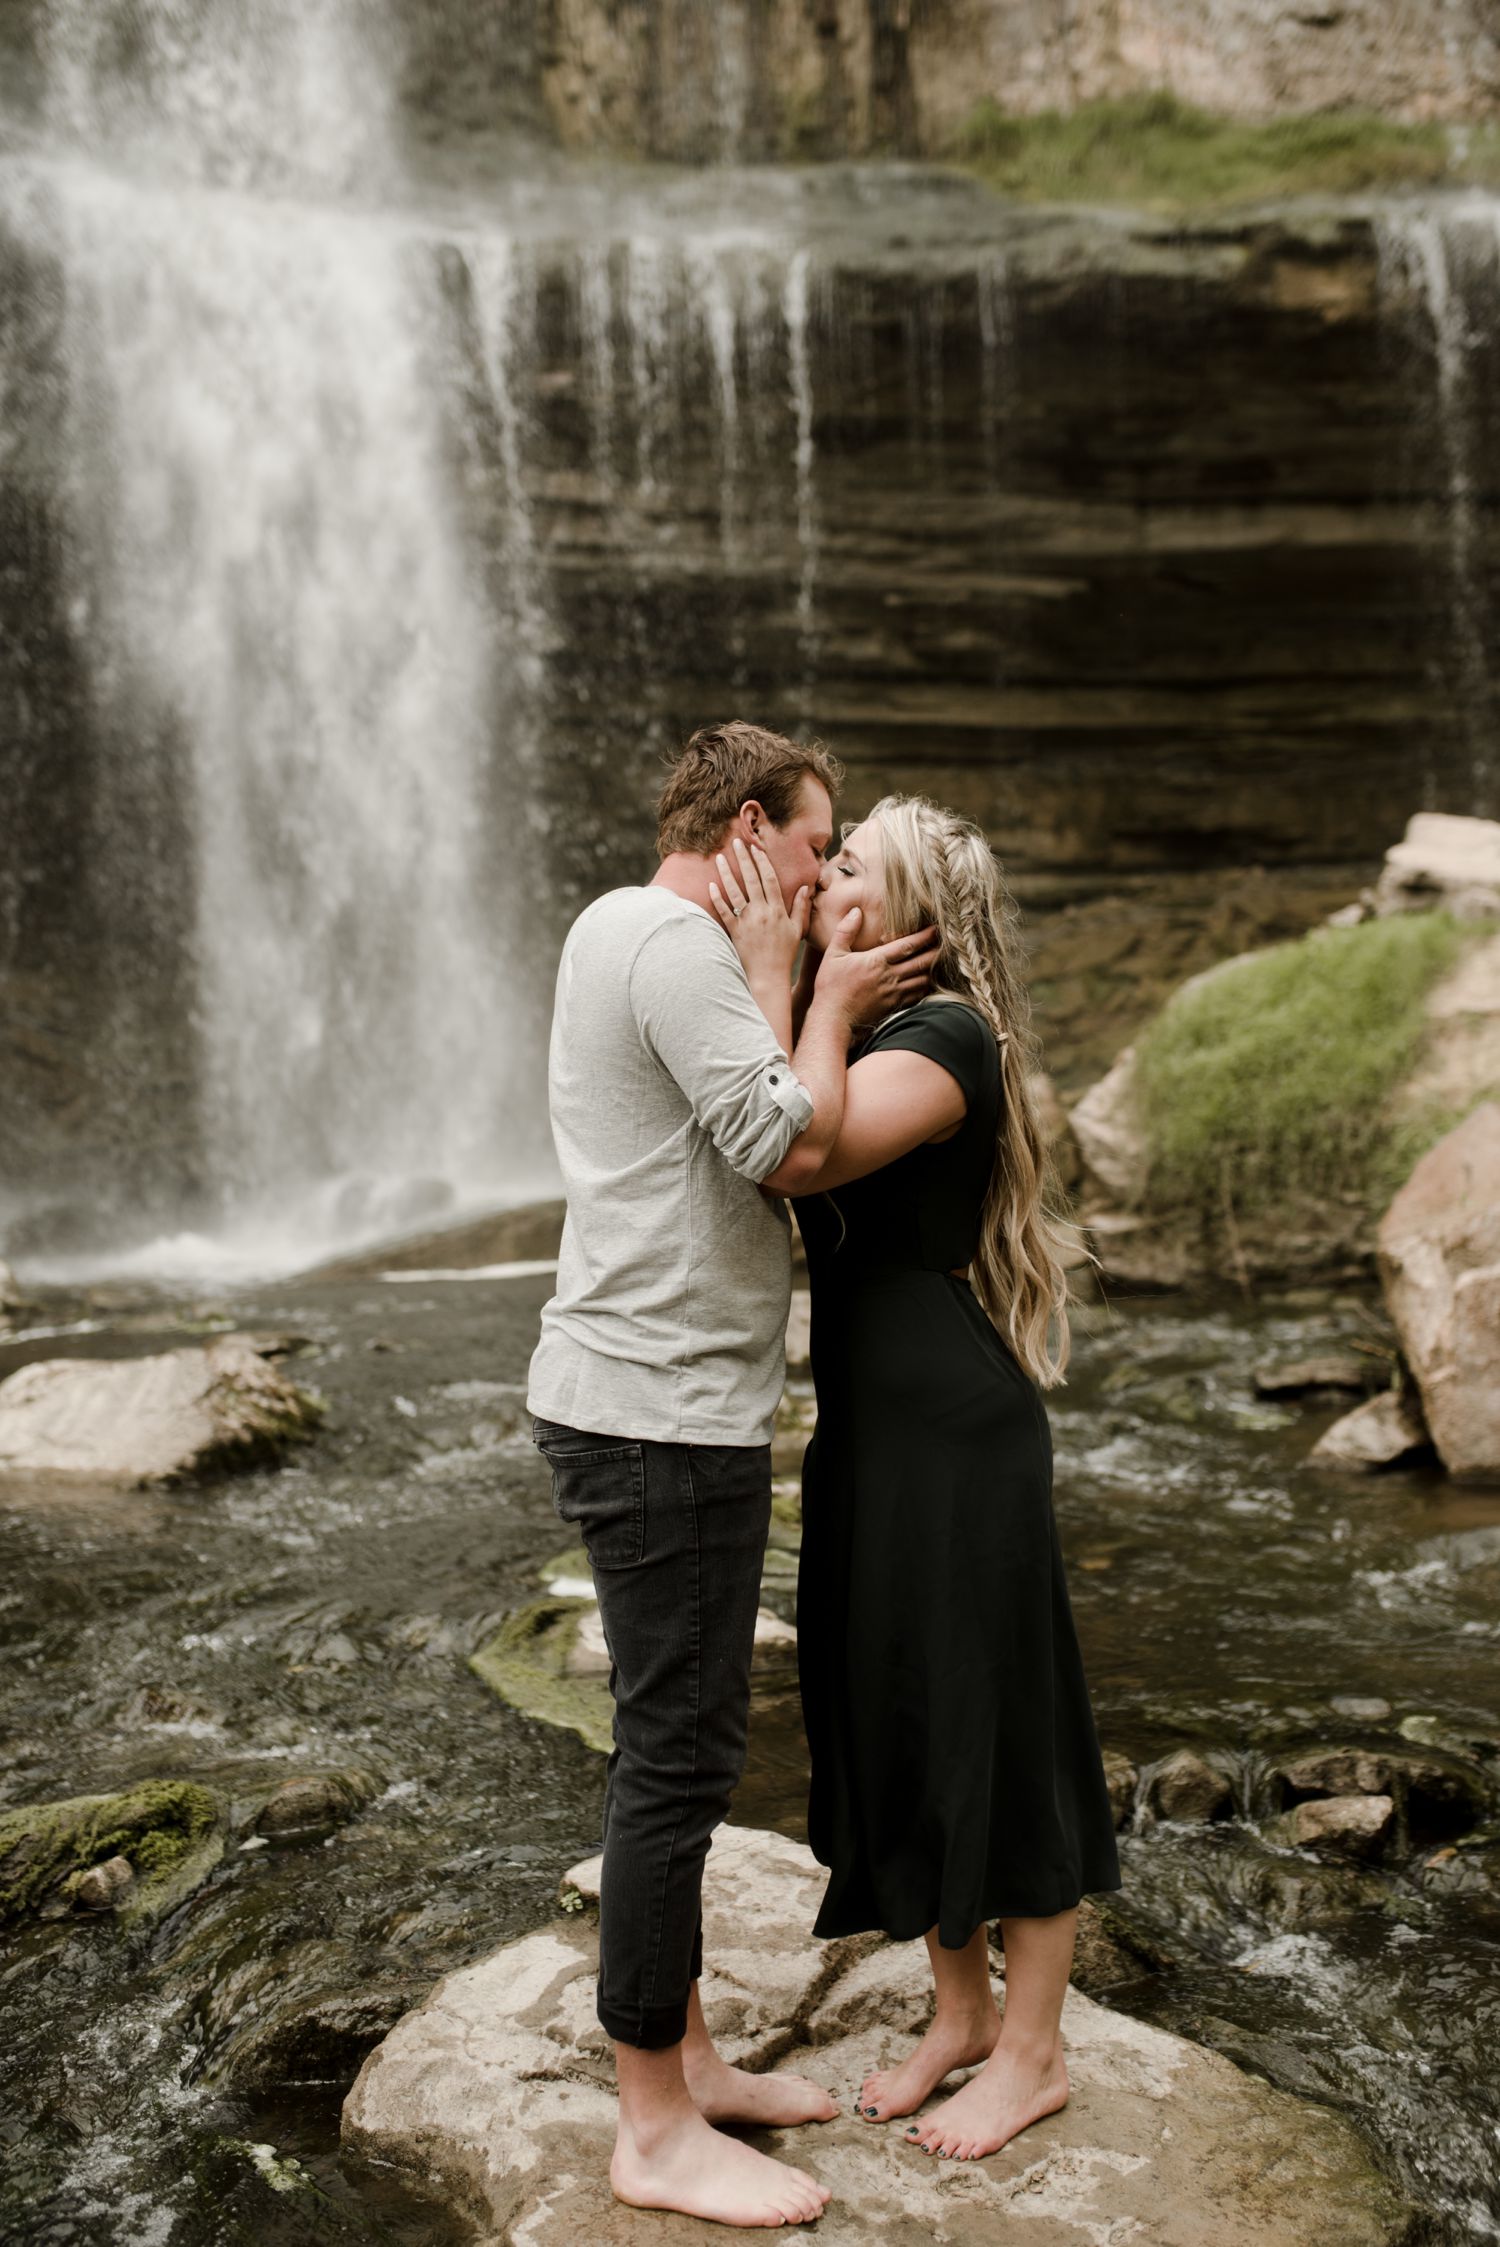 Hamilton waterfall engagement, Ontario wedding photographer, Canadian elopement photographer, Vanessa Renae Photography, couple standing on a rock, kissing in front of a waterfall in Dundas Valley, Hamilton Ontario.